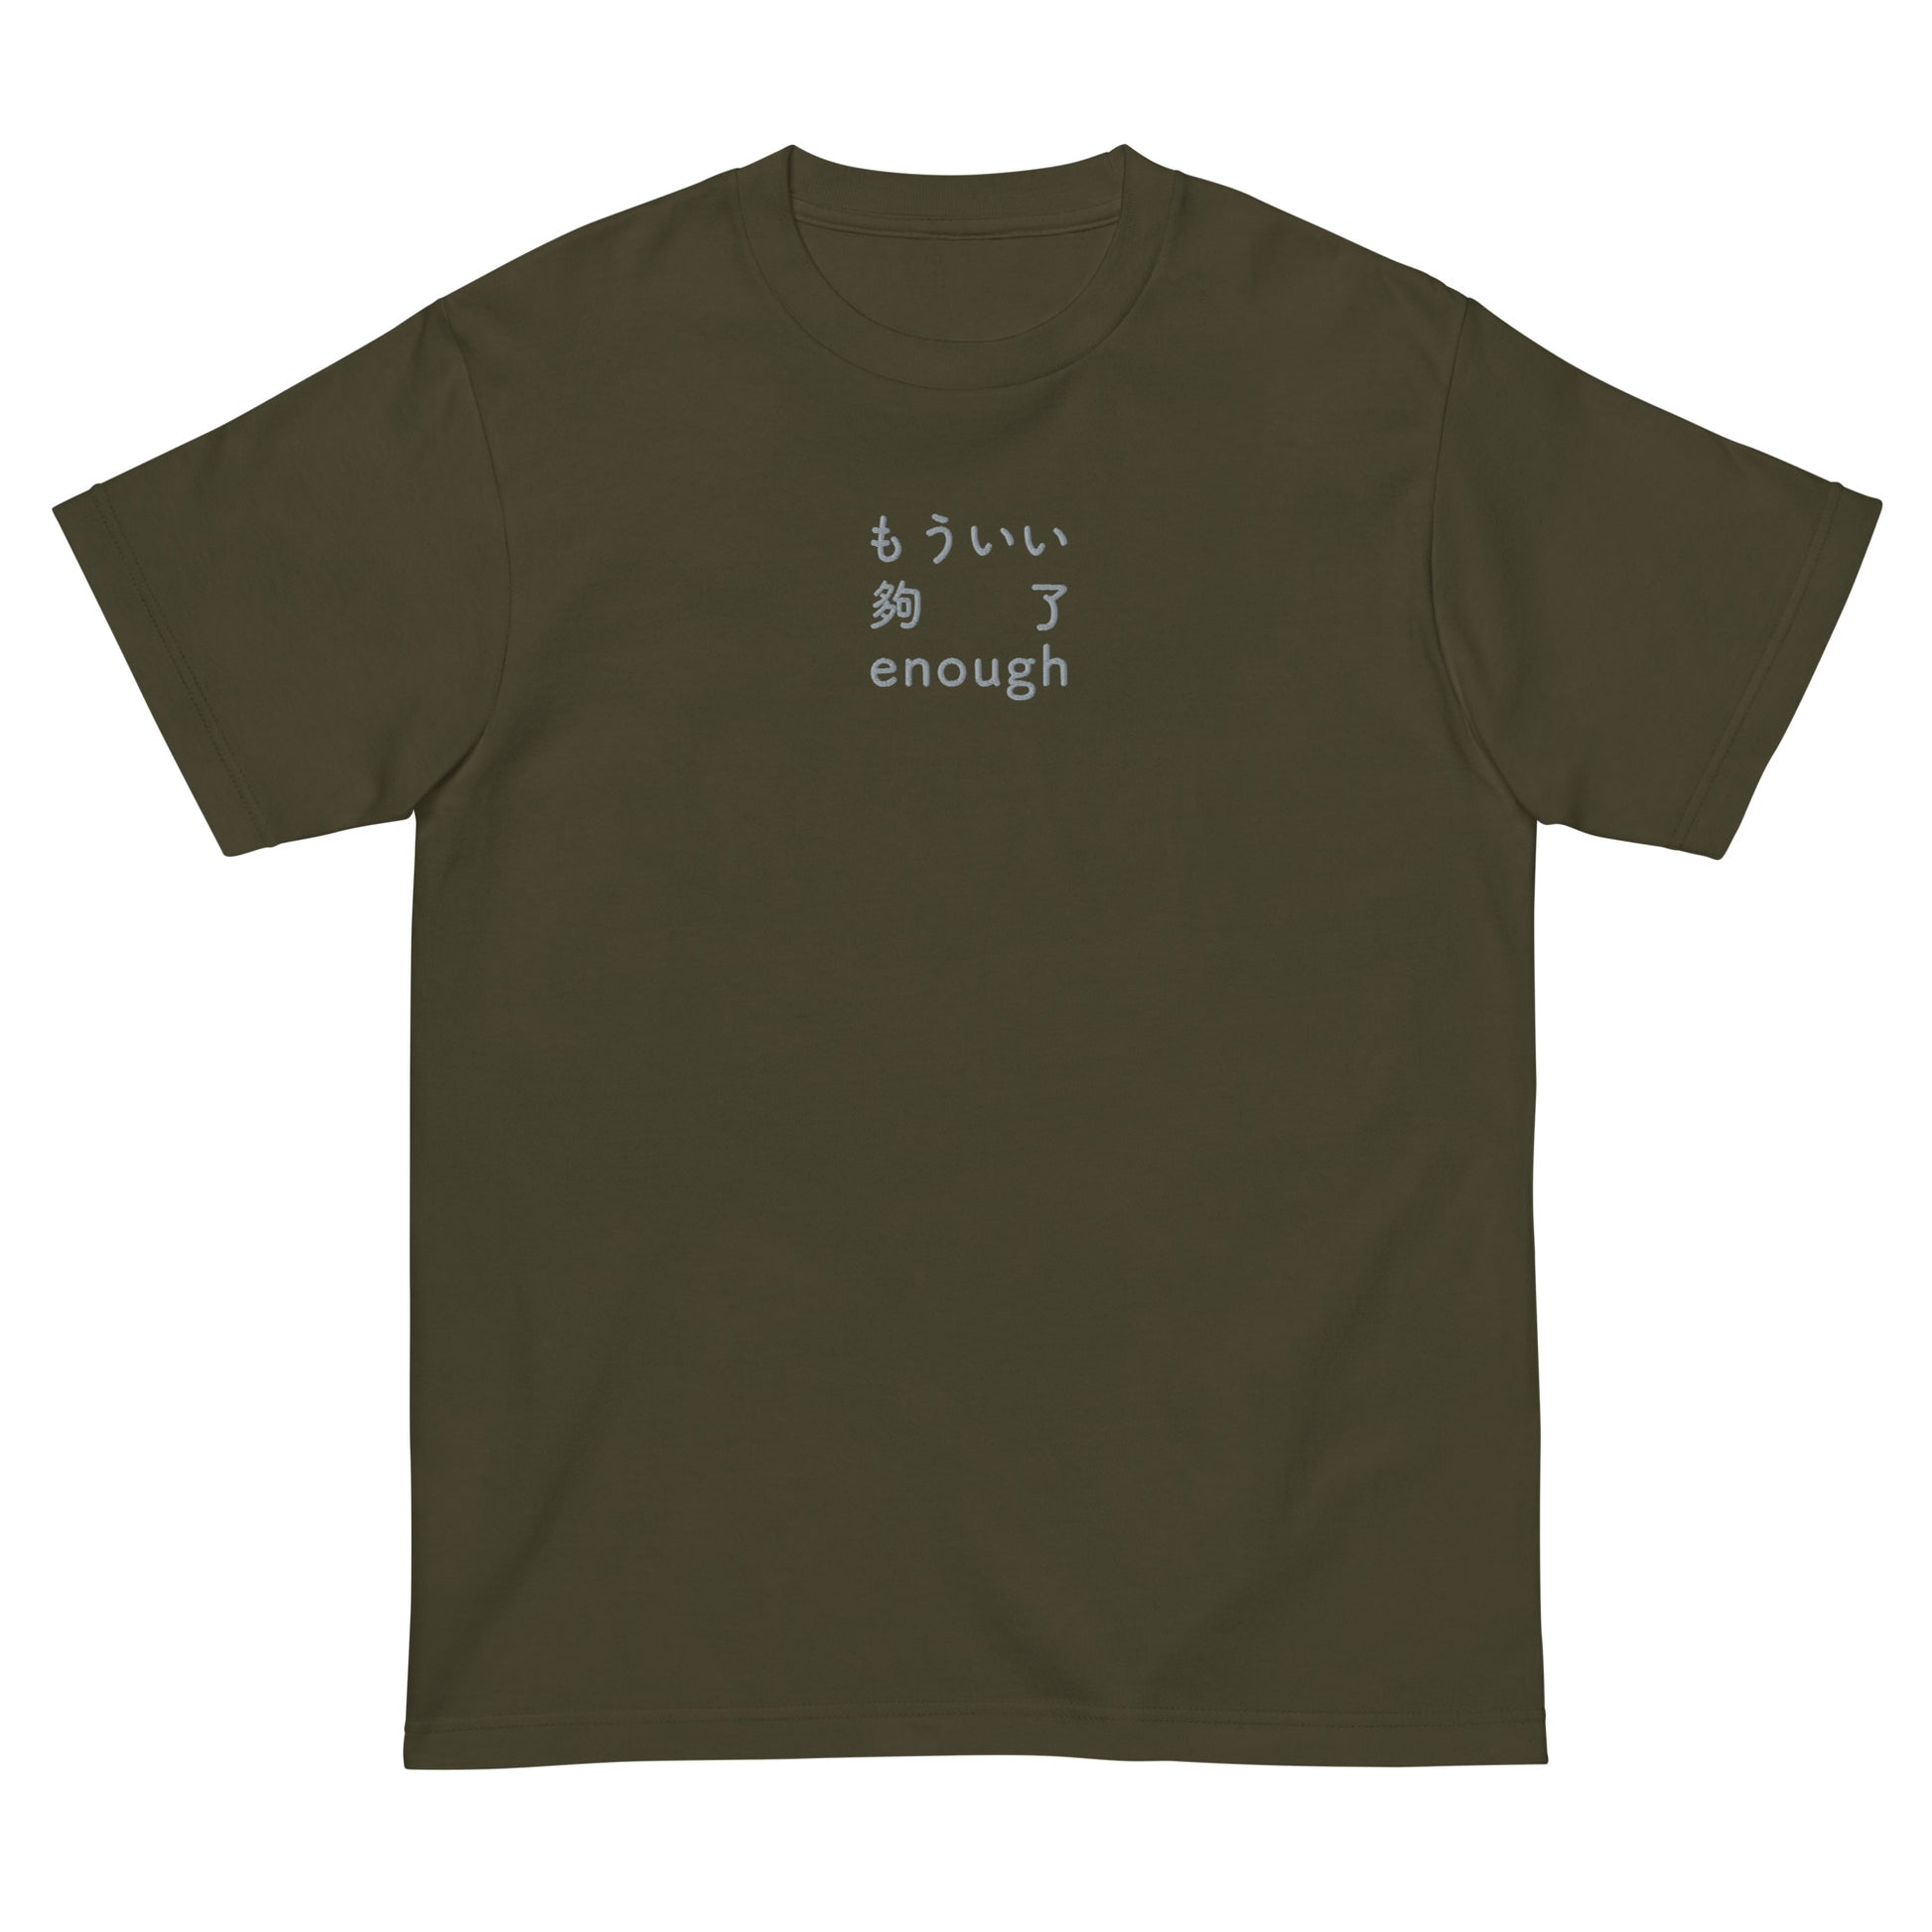 Green High Quality Tee - Front Design with an light gray Embroidery "Enough" in Japanese,Chinese and English